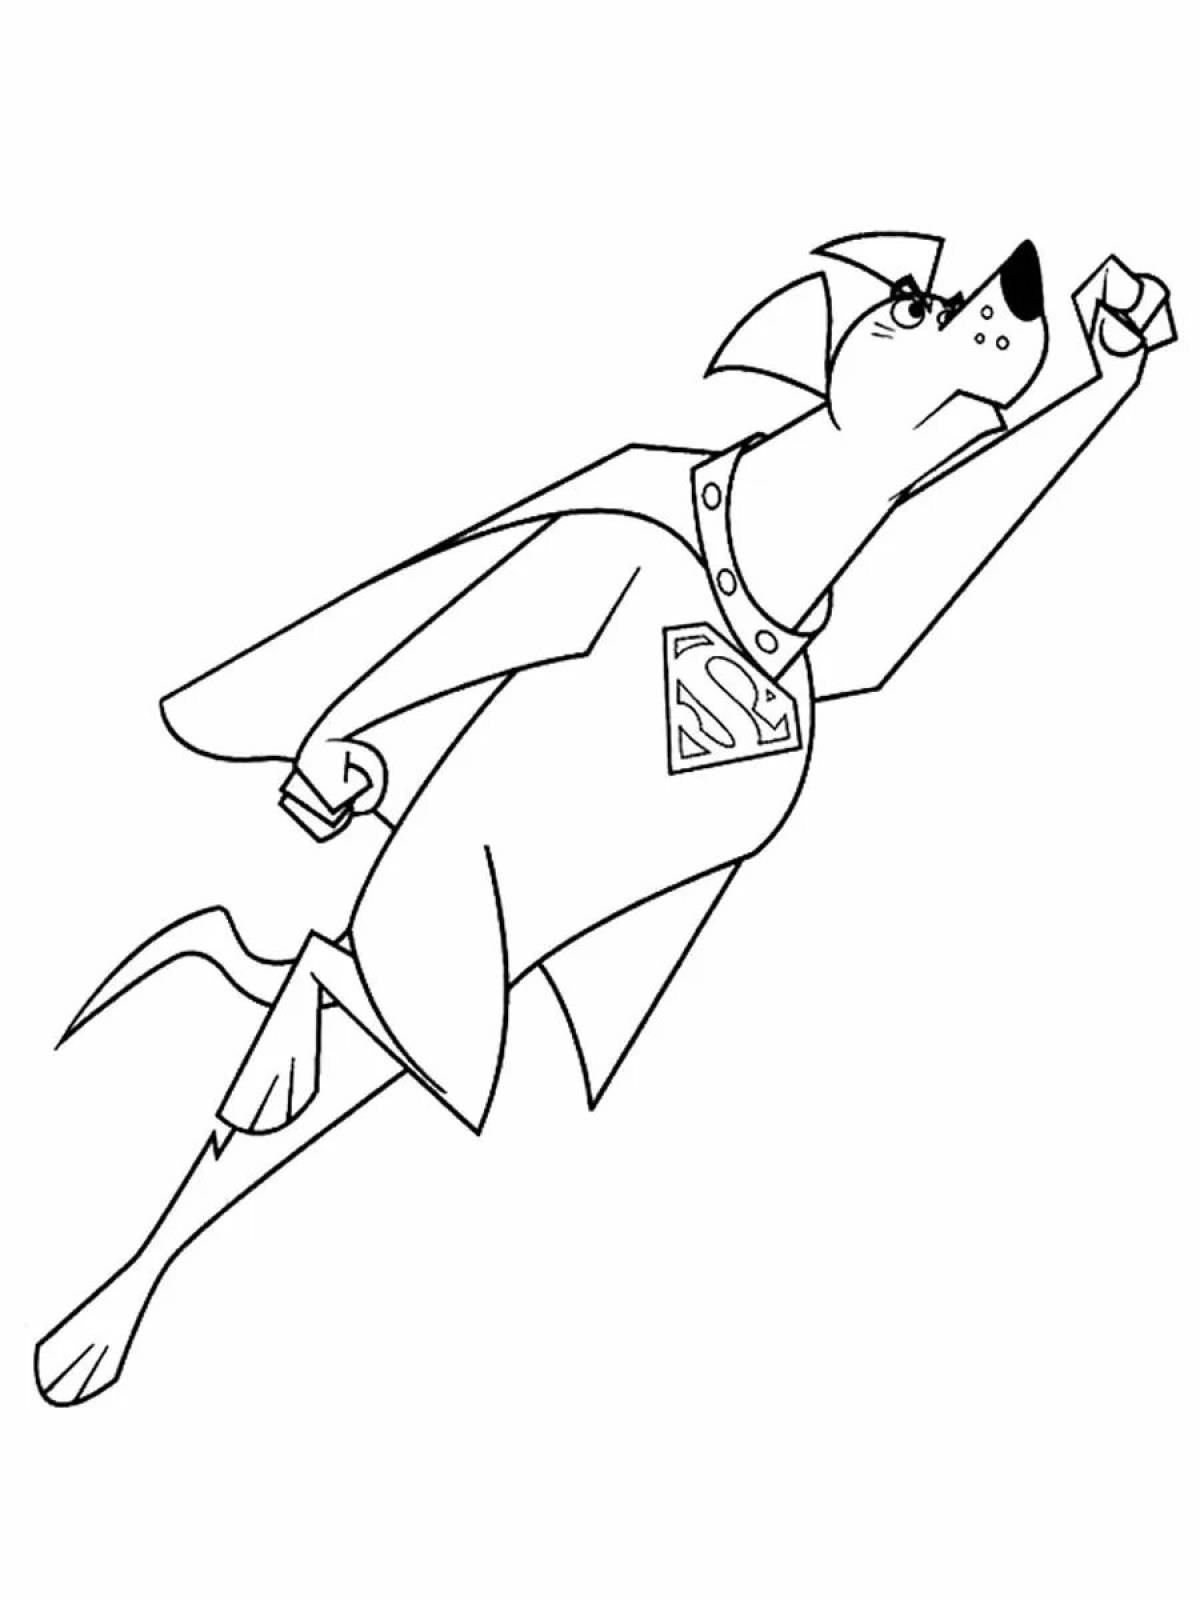 Coloring book witty superhero dog